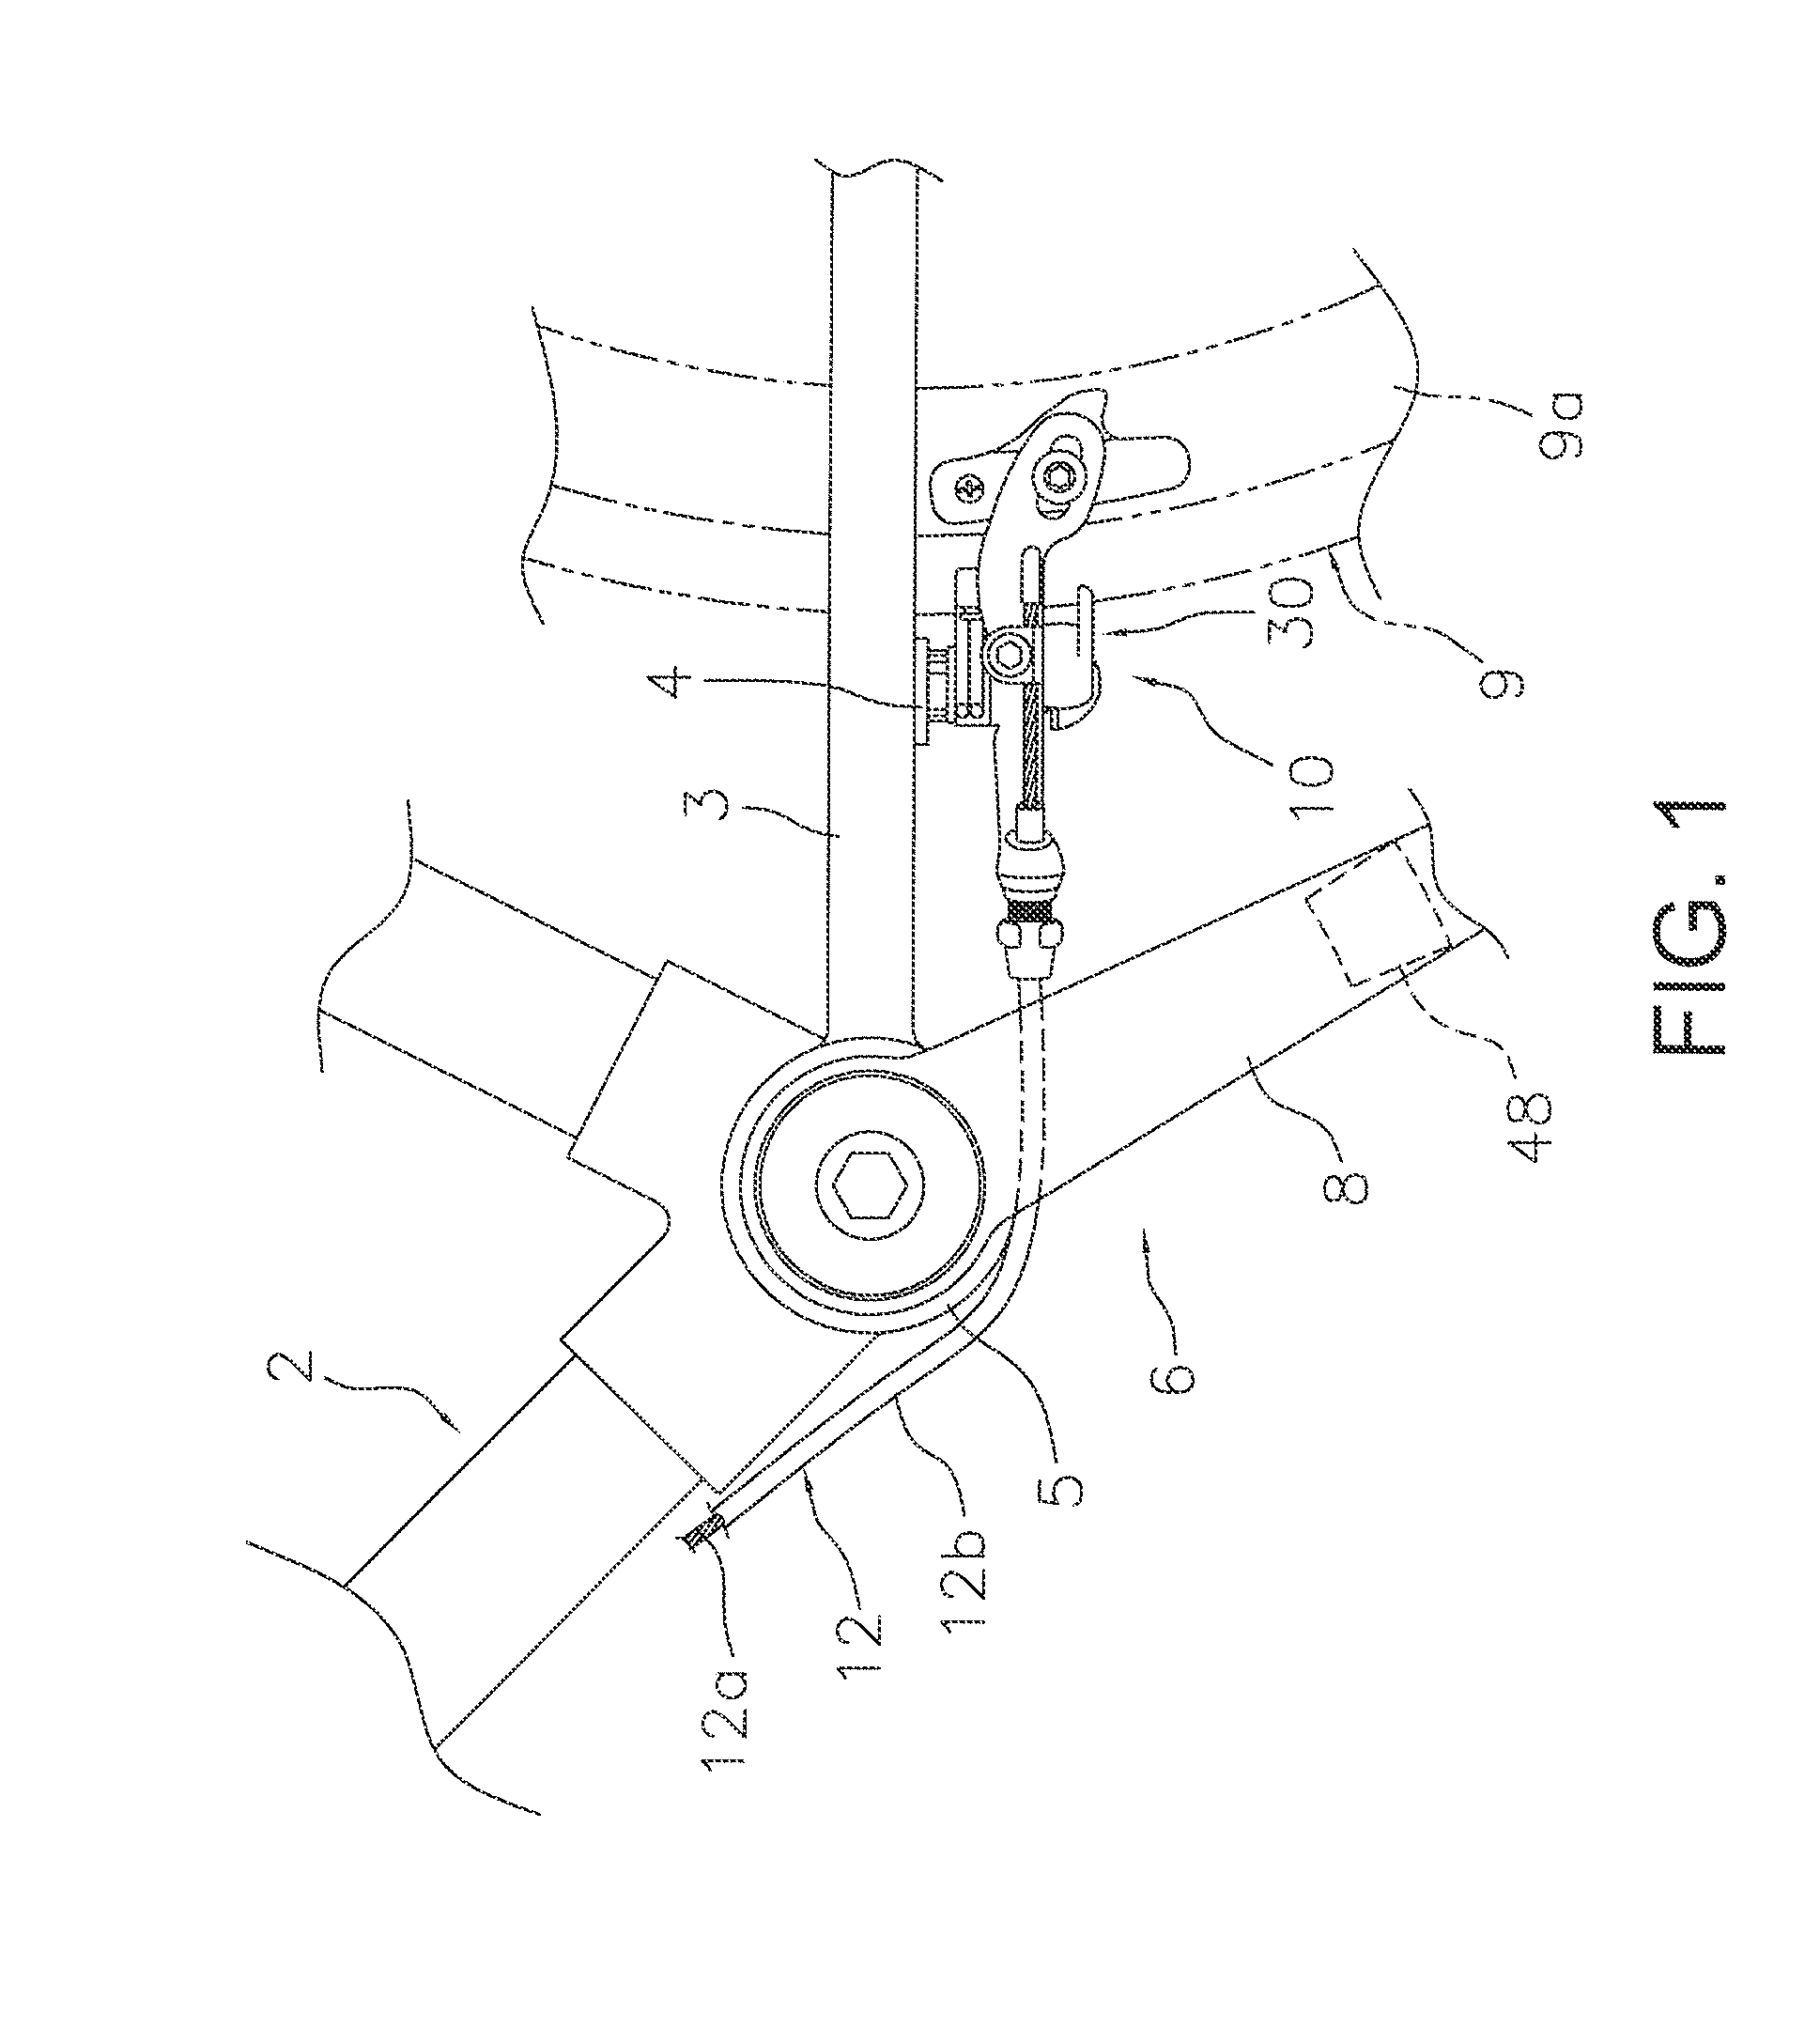 Bicycle having brake with quick release mechanism